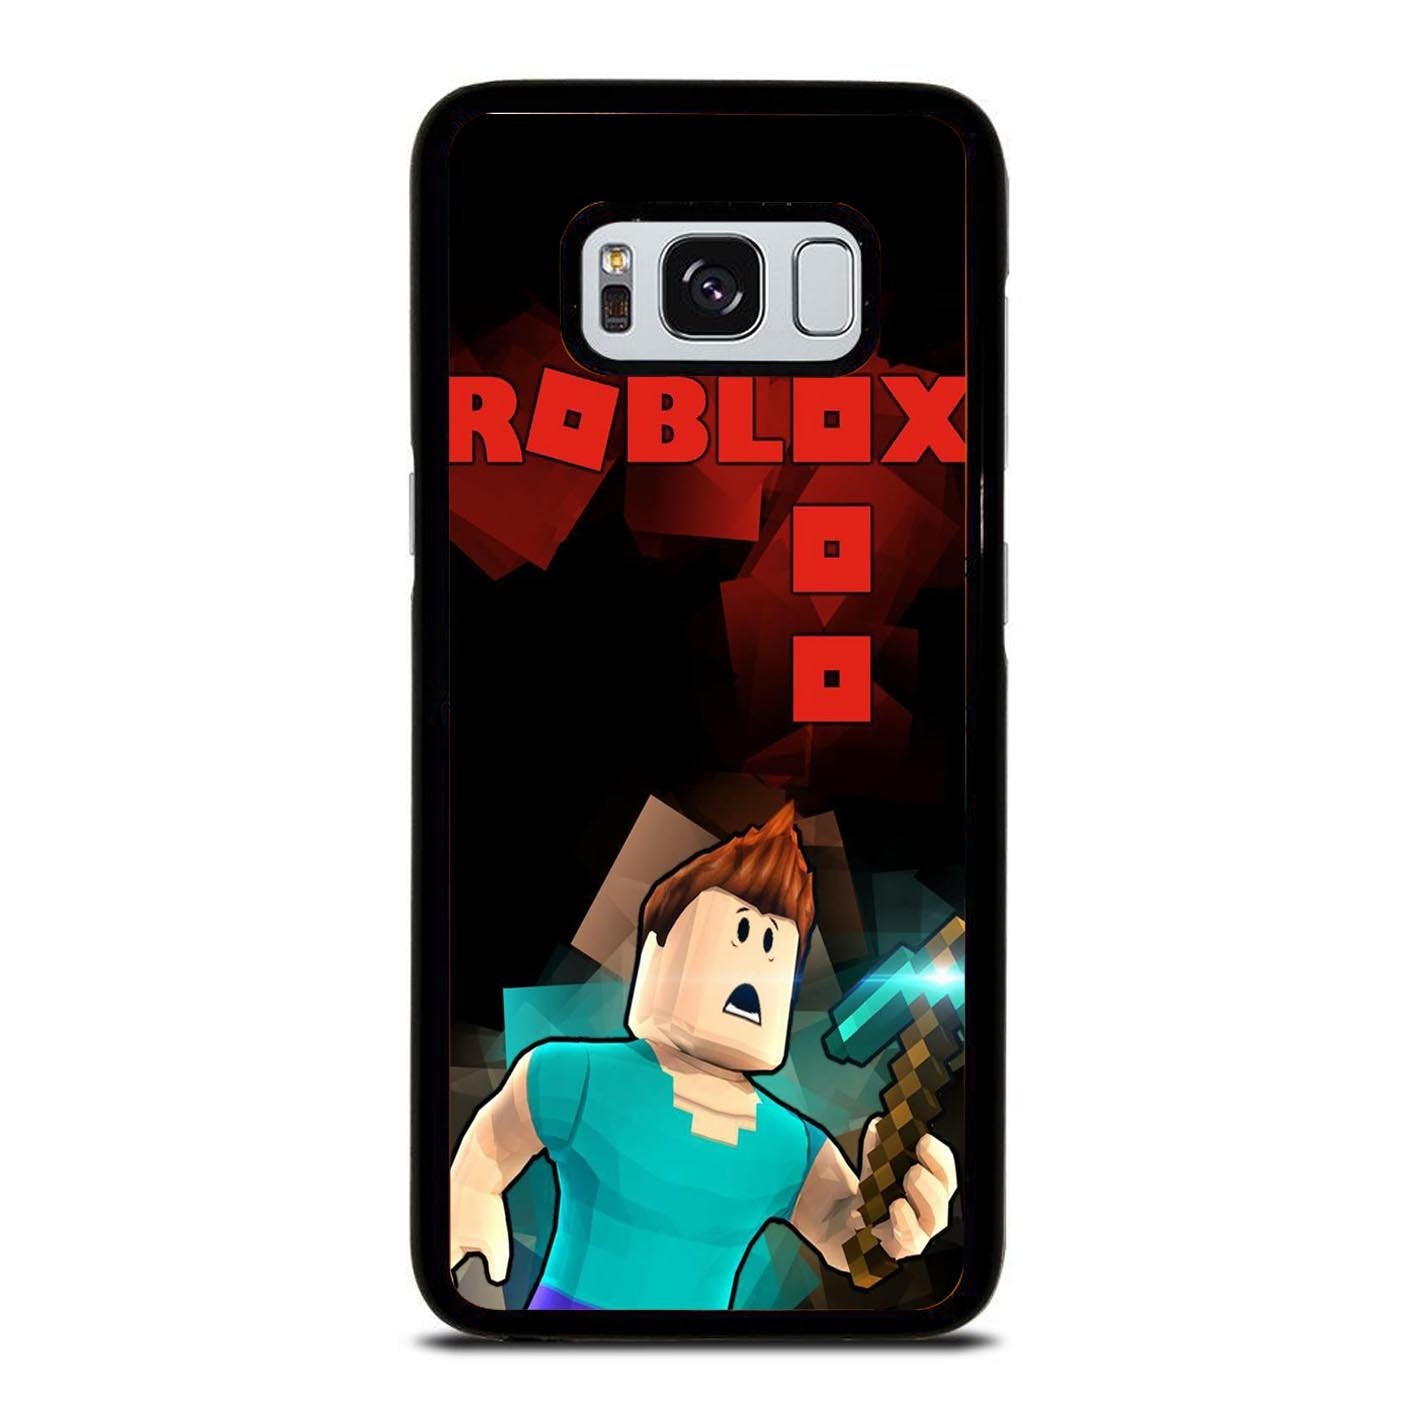 Roblox Artwork 05 Samsung Galaxy S8 Plus Case Iphone And Android Teecustom - roblox artwork